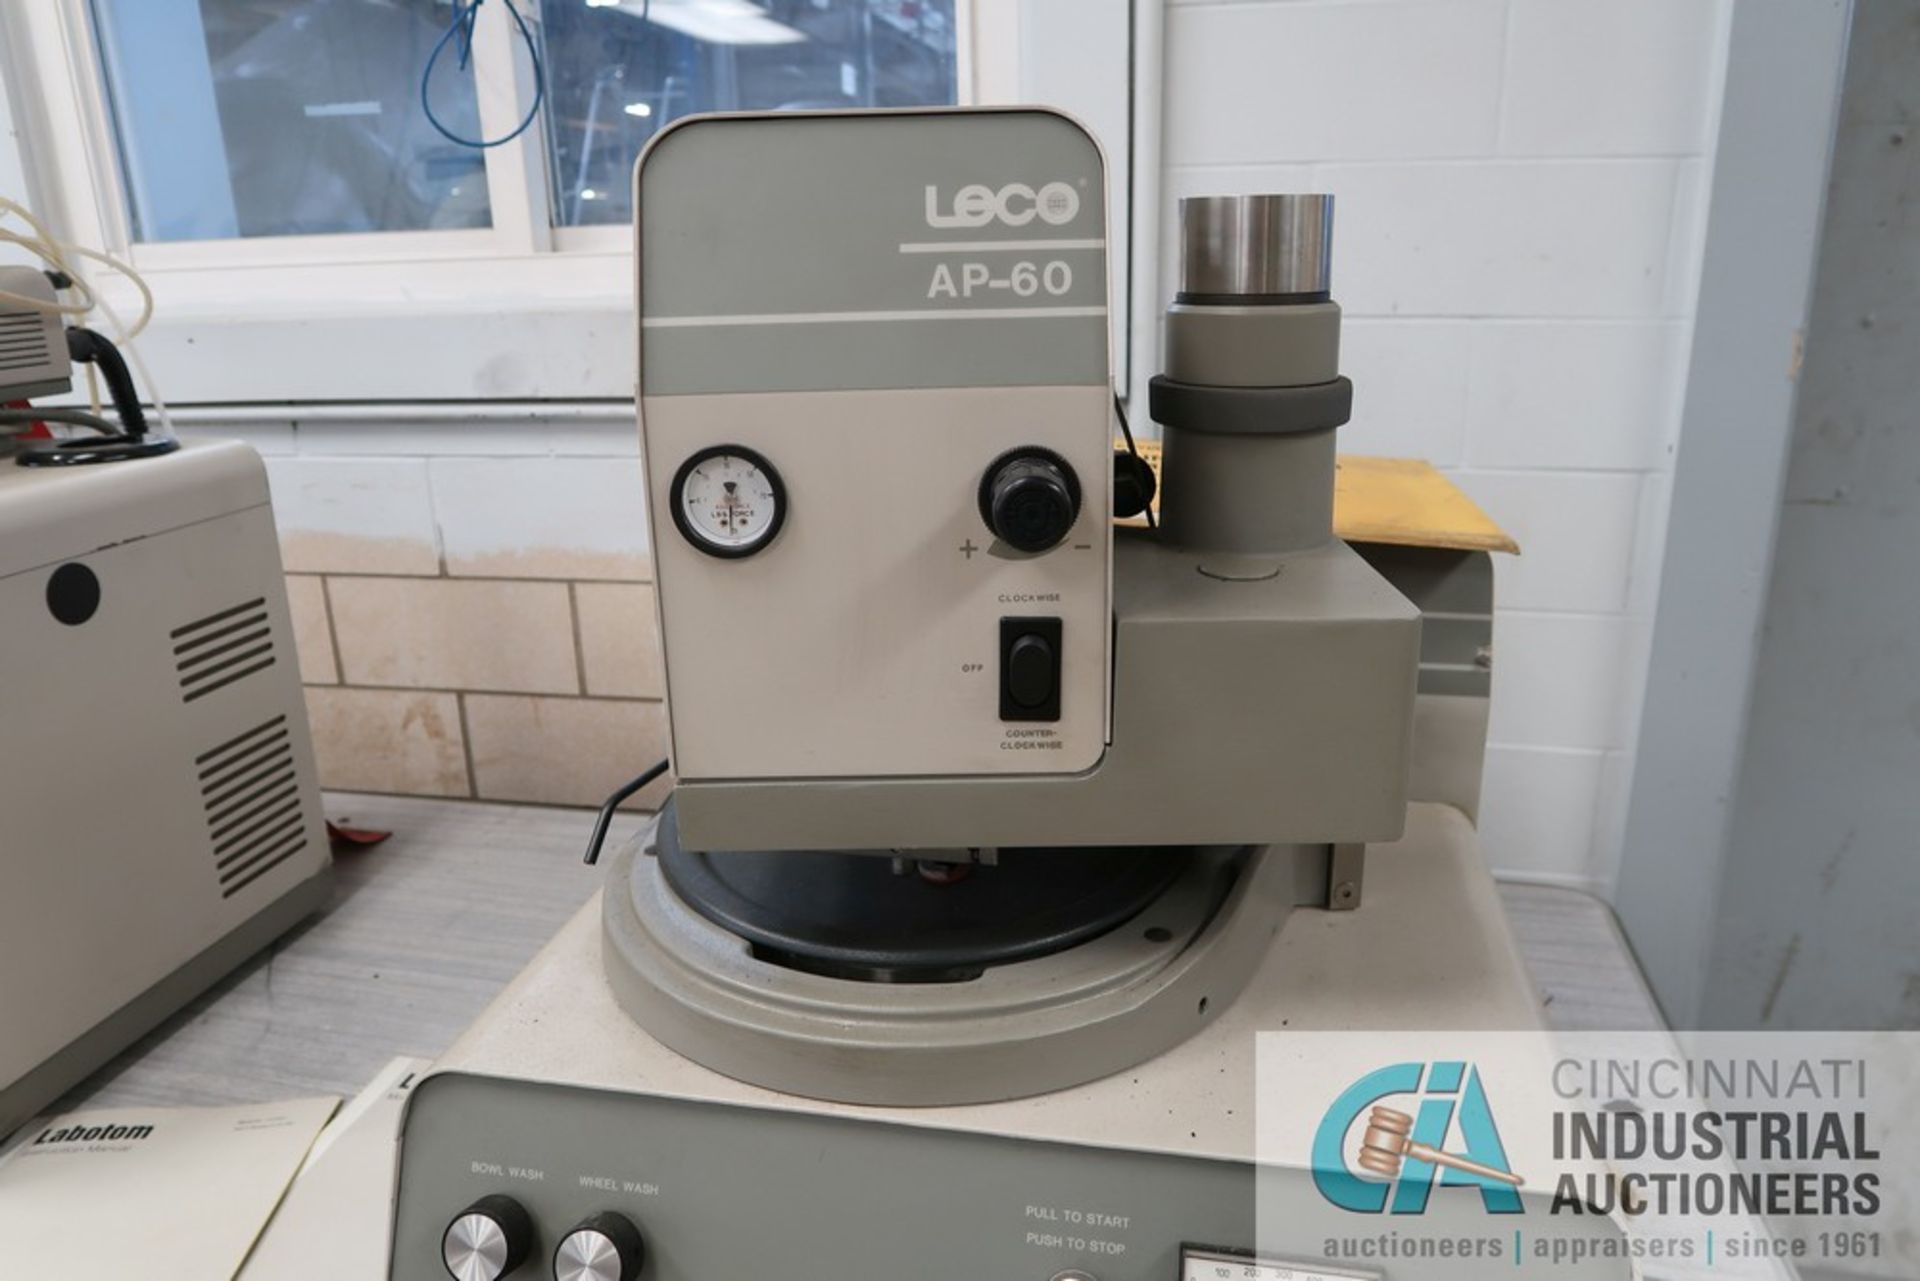 LECO MODEL 891-701-900 VP-160 VARIABLE SPEED POLISHING / GRINDING MACHINE; S/N 4607, WITH AP-60 - Image 4 of 6